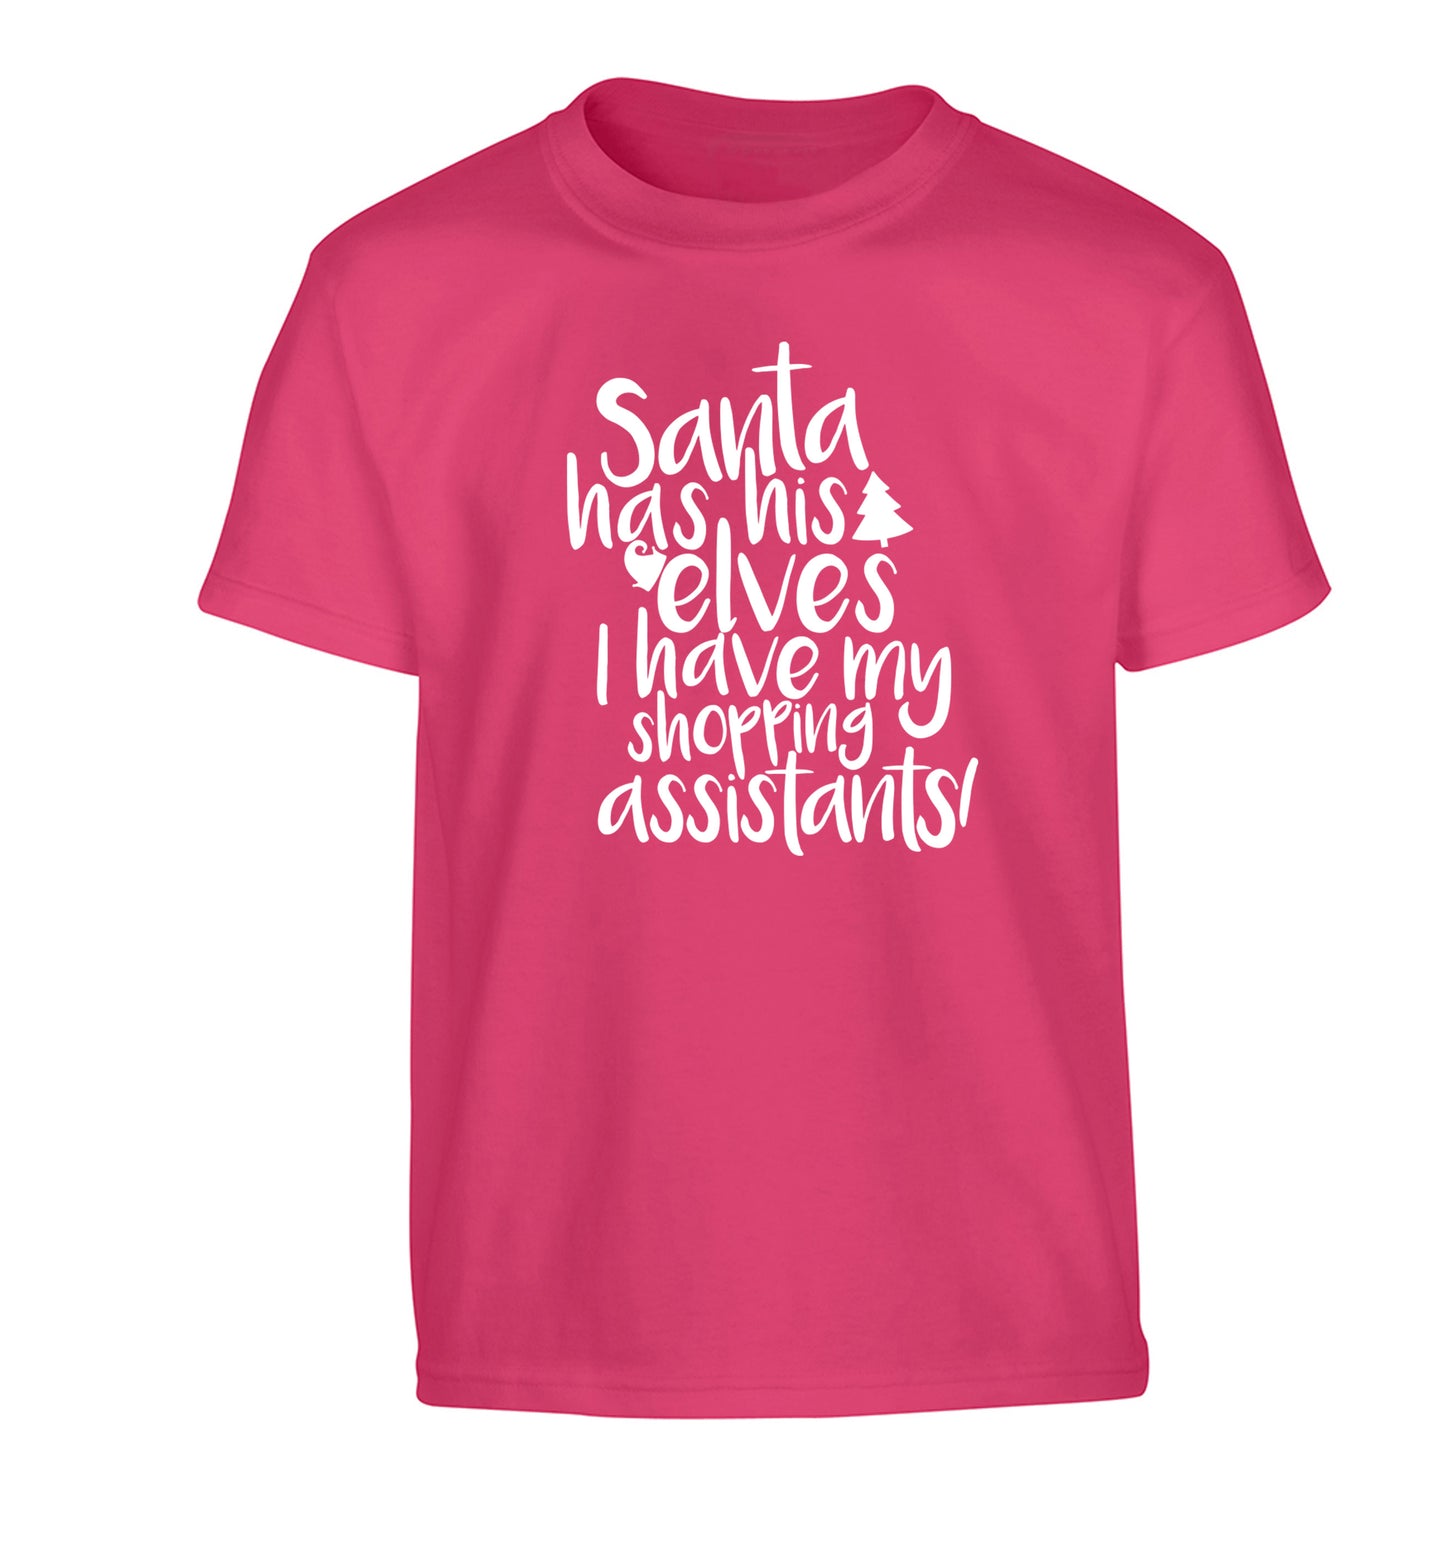 Santa has his elves I have my shopping assistant Children's pink Tshirt 12-14 Years